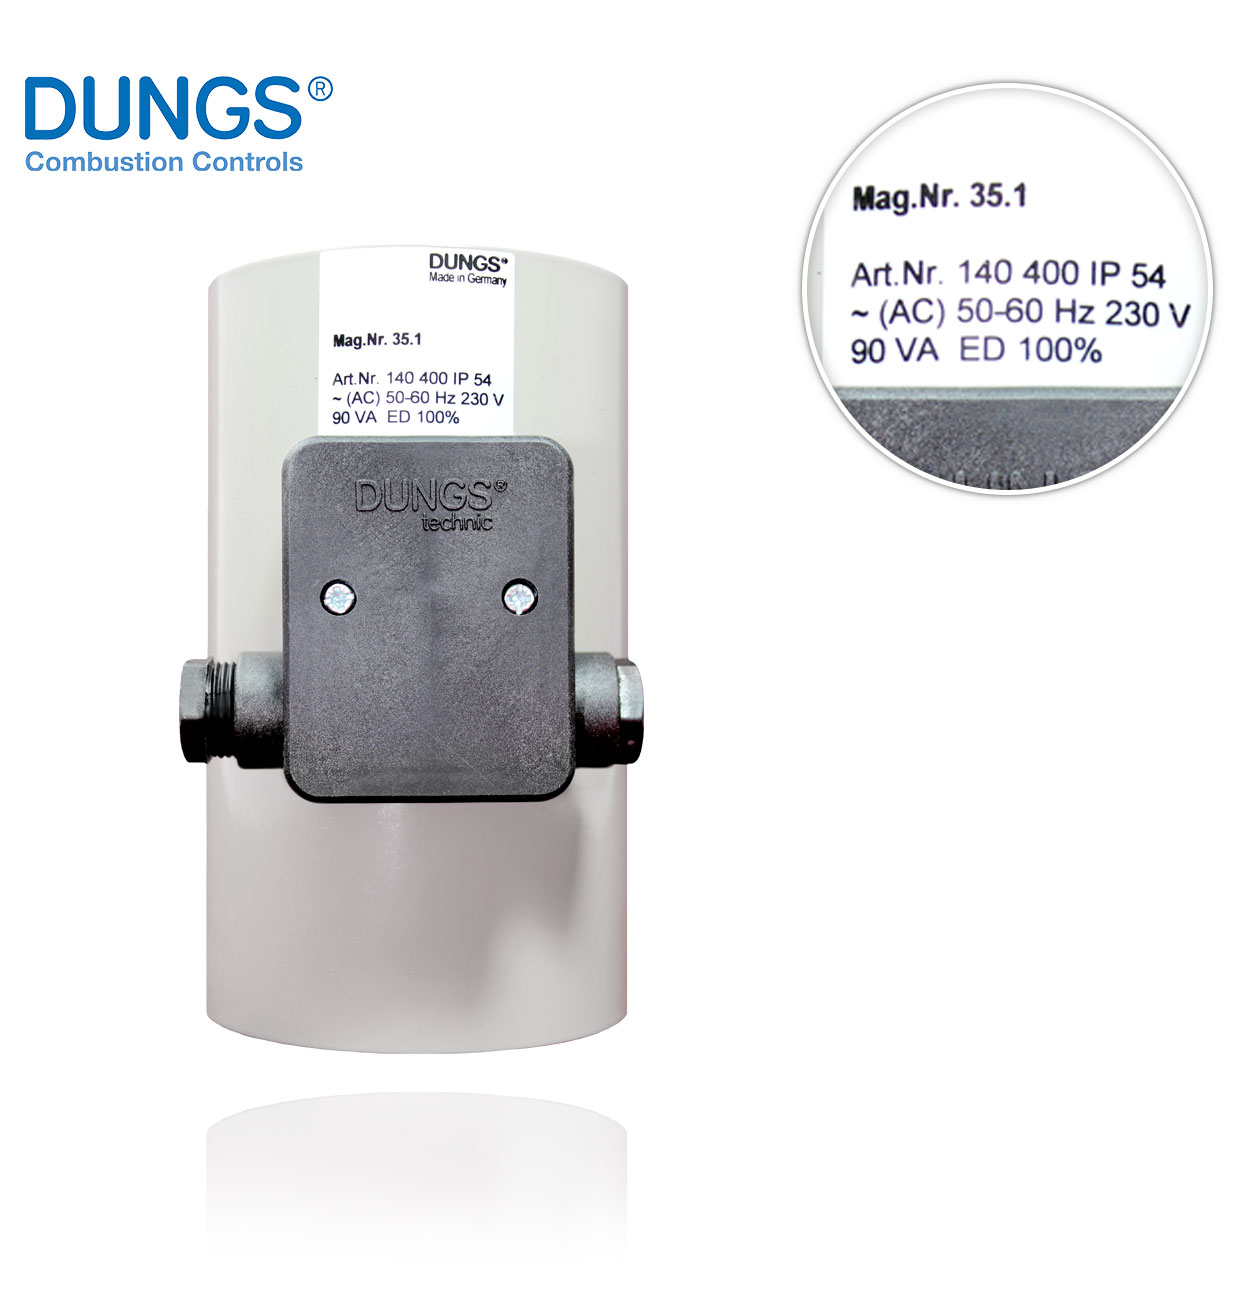 DUNGS NR-35.1 DUNGS COIL